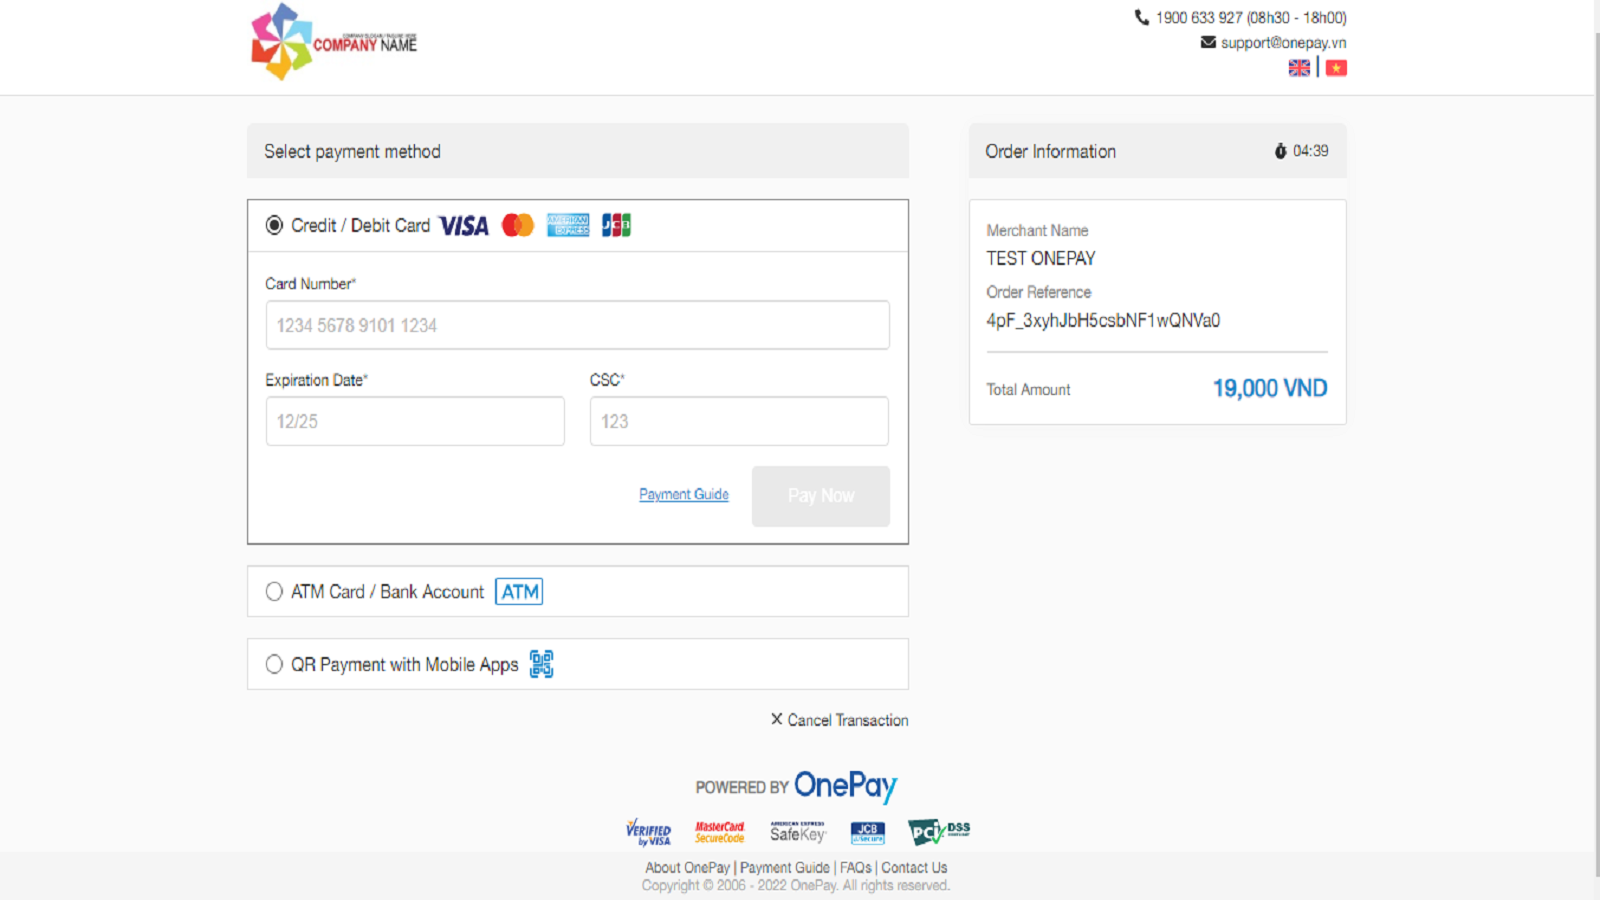 Redirect to OnePAY payment page